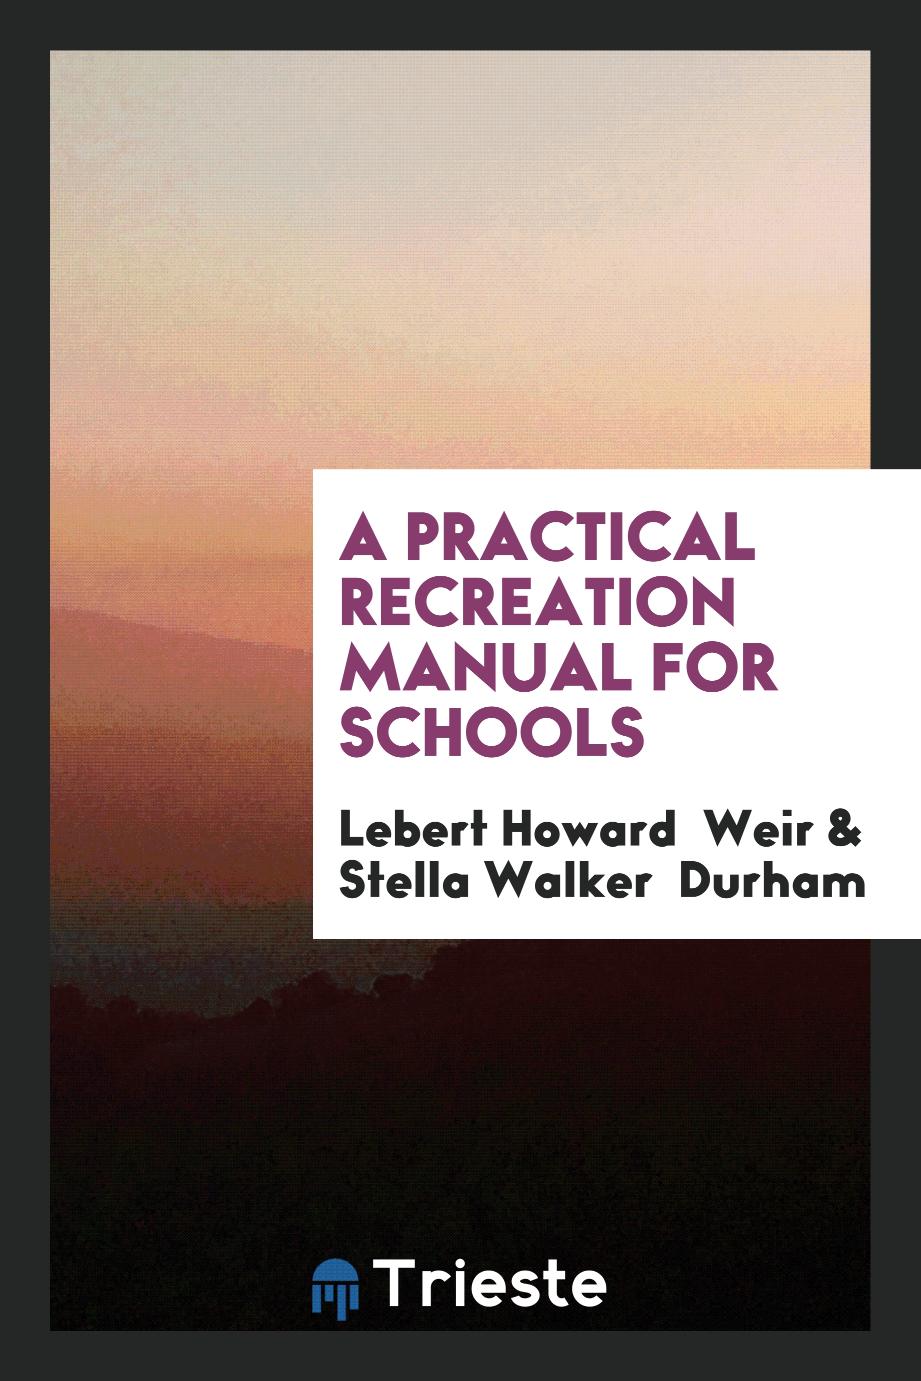 A Practical Recreation Manual for Schools